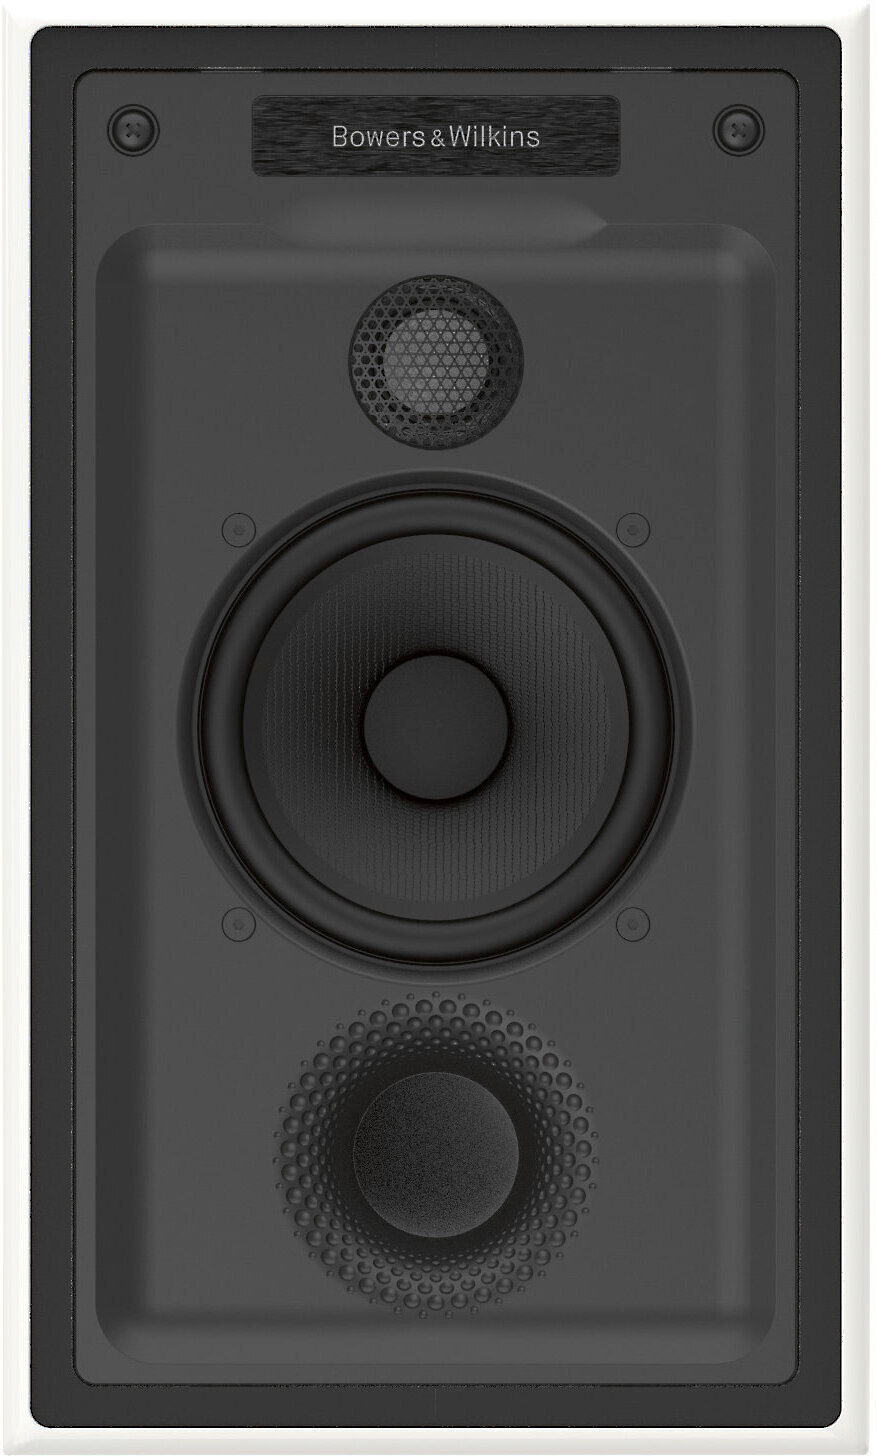 Bowers & Wilkins In-wall Speakers at Crutchfield